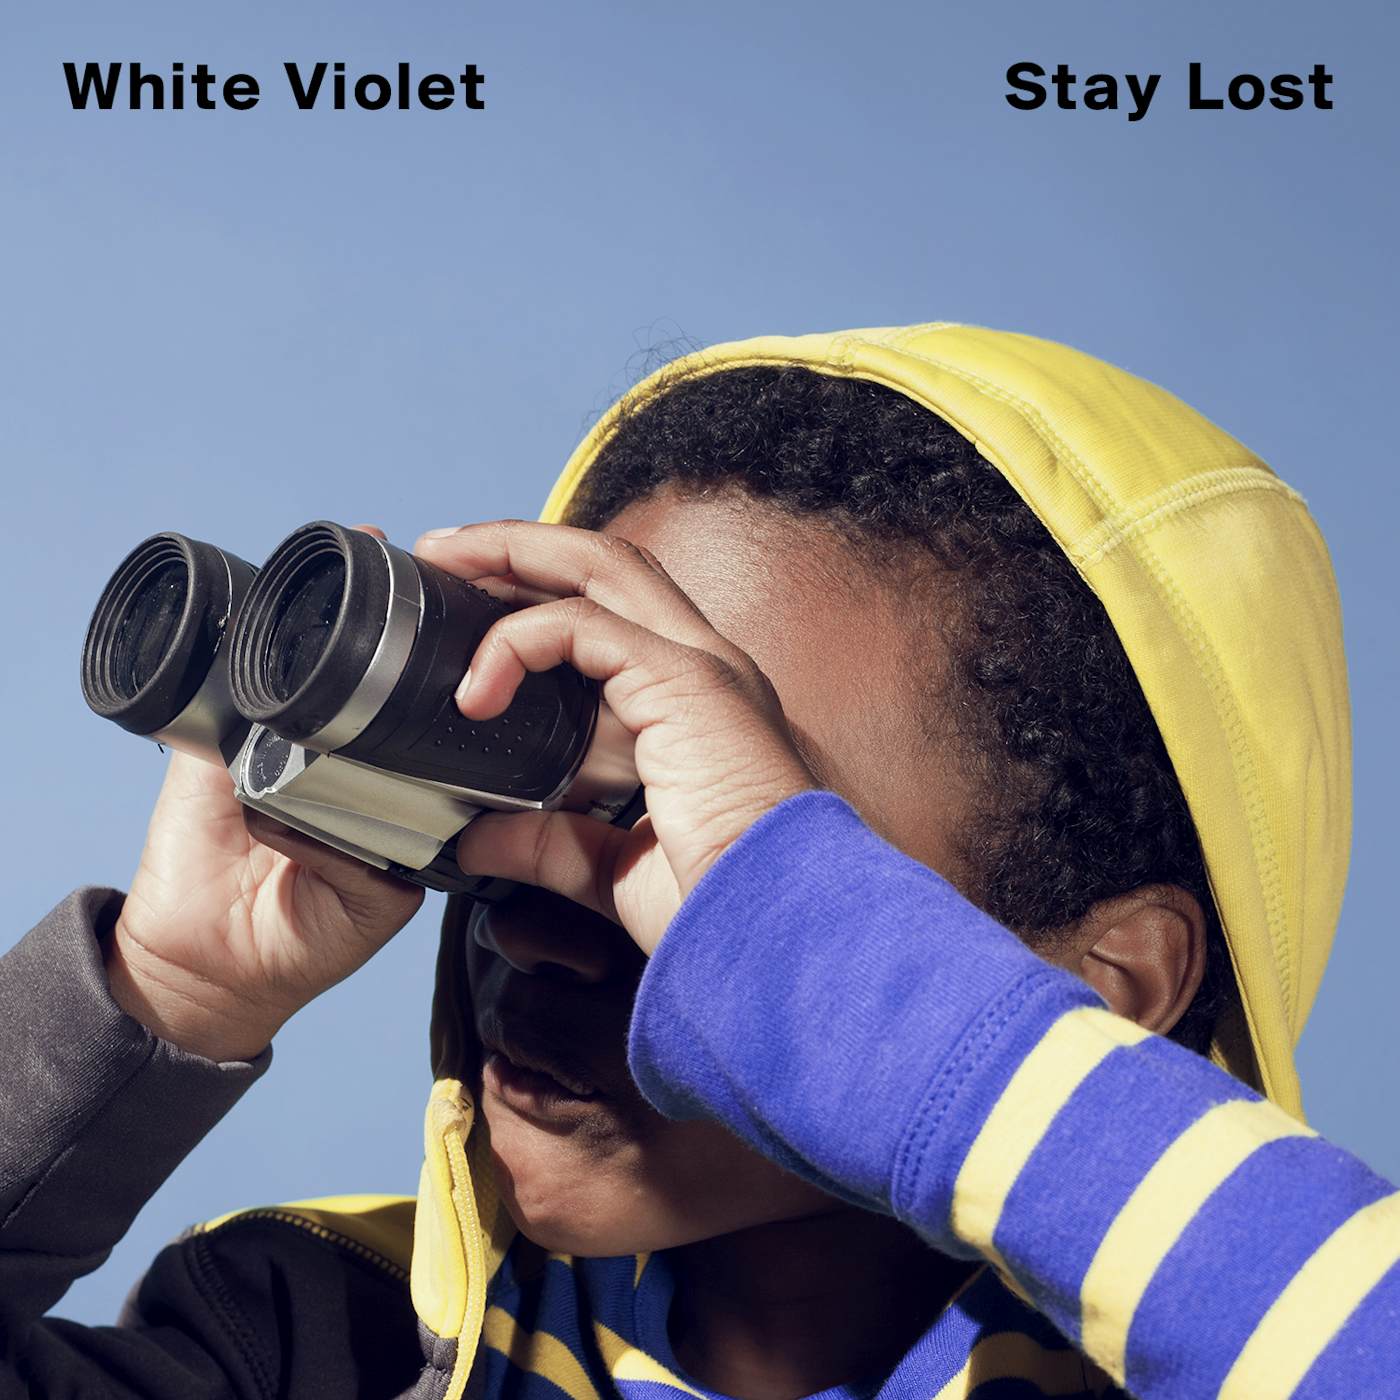 White Violet STAY LOST CD